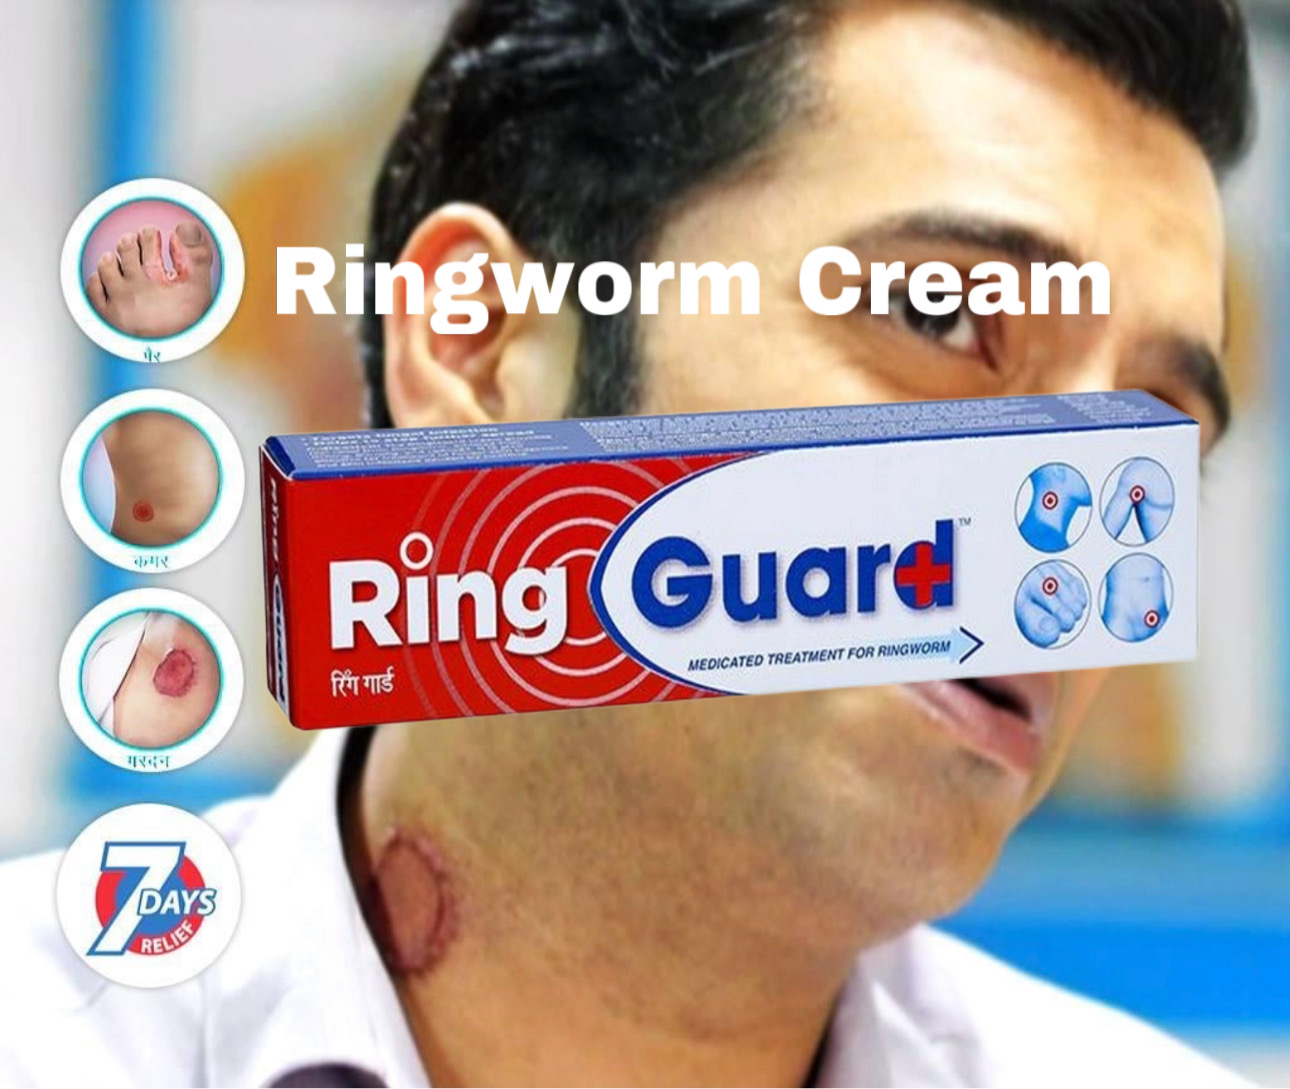 Ring Guard Cream, 20g Medicated Treatment for Ringworm